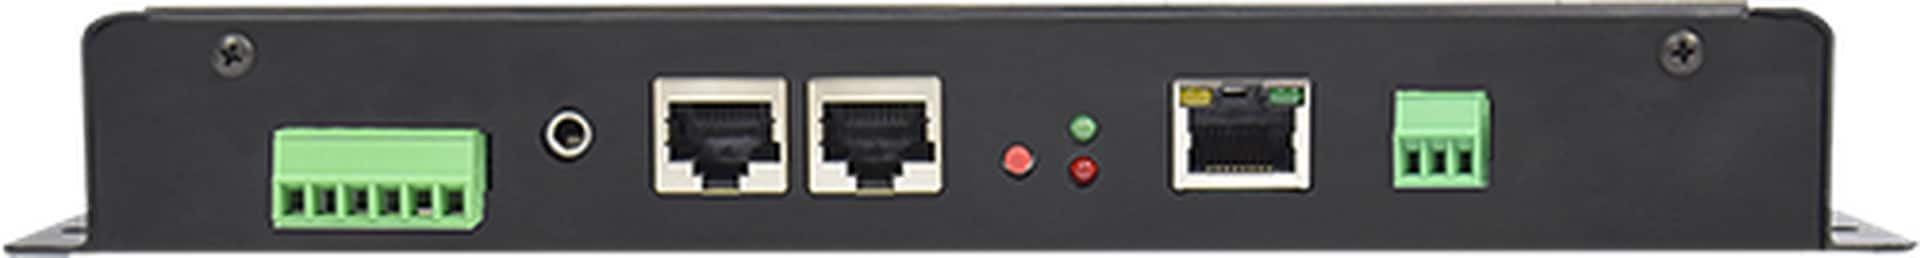 Audio Enhancement MS-300 Network Interface Ethernet Switch